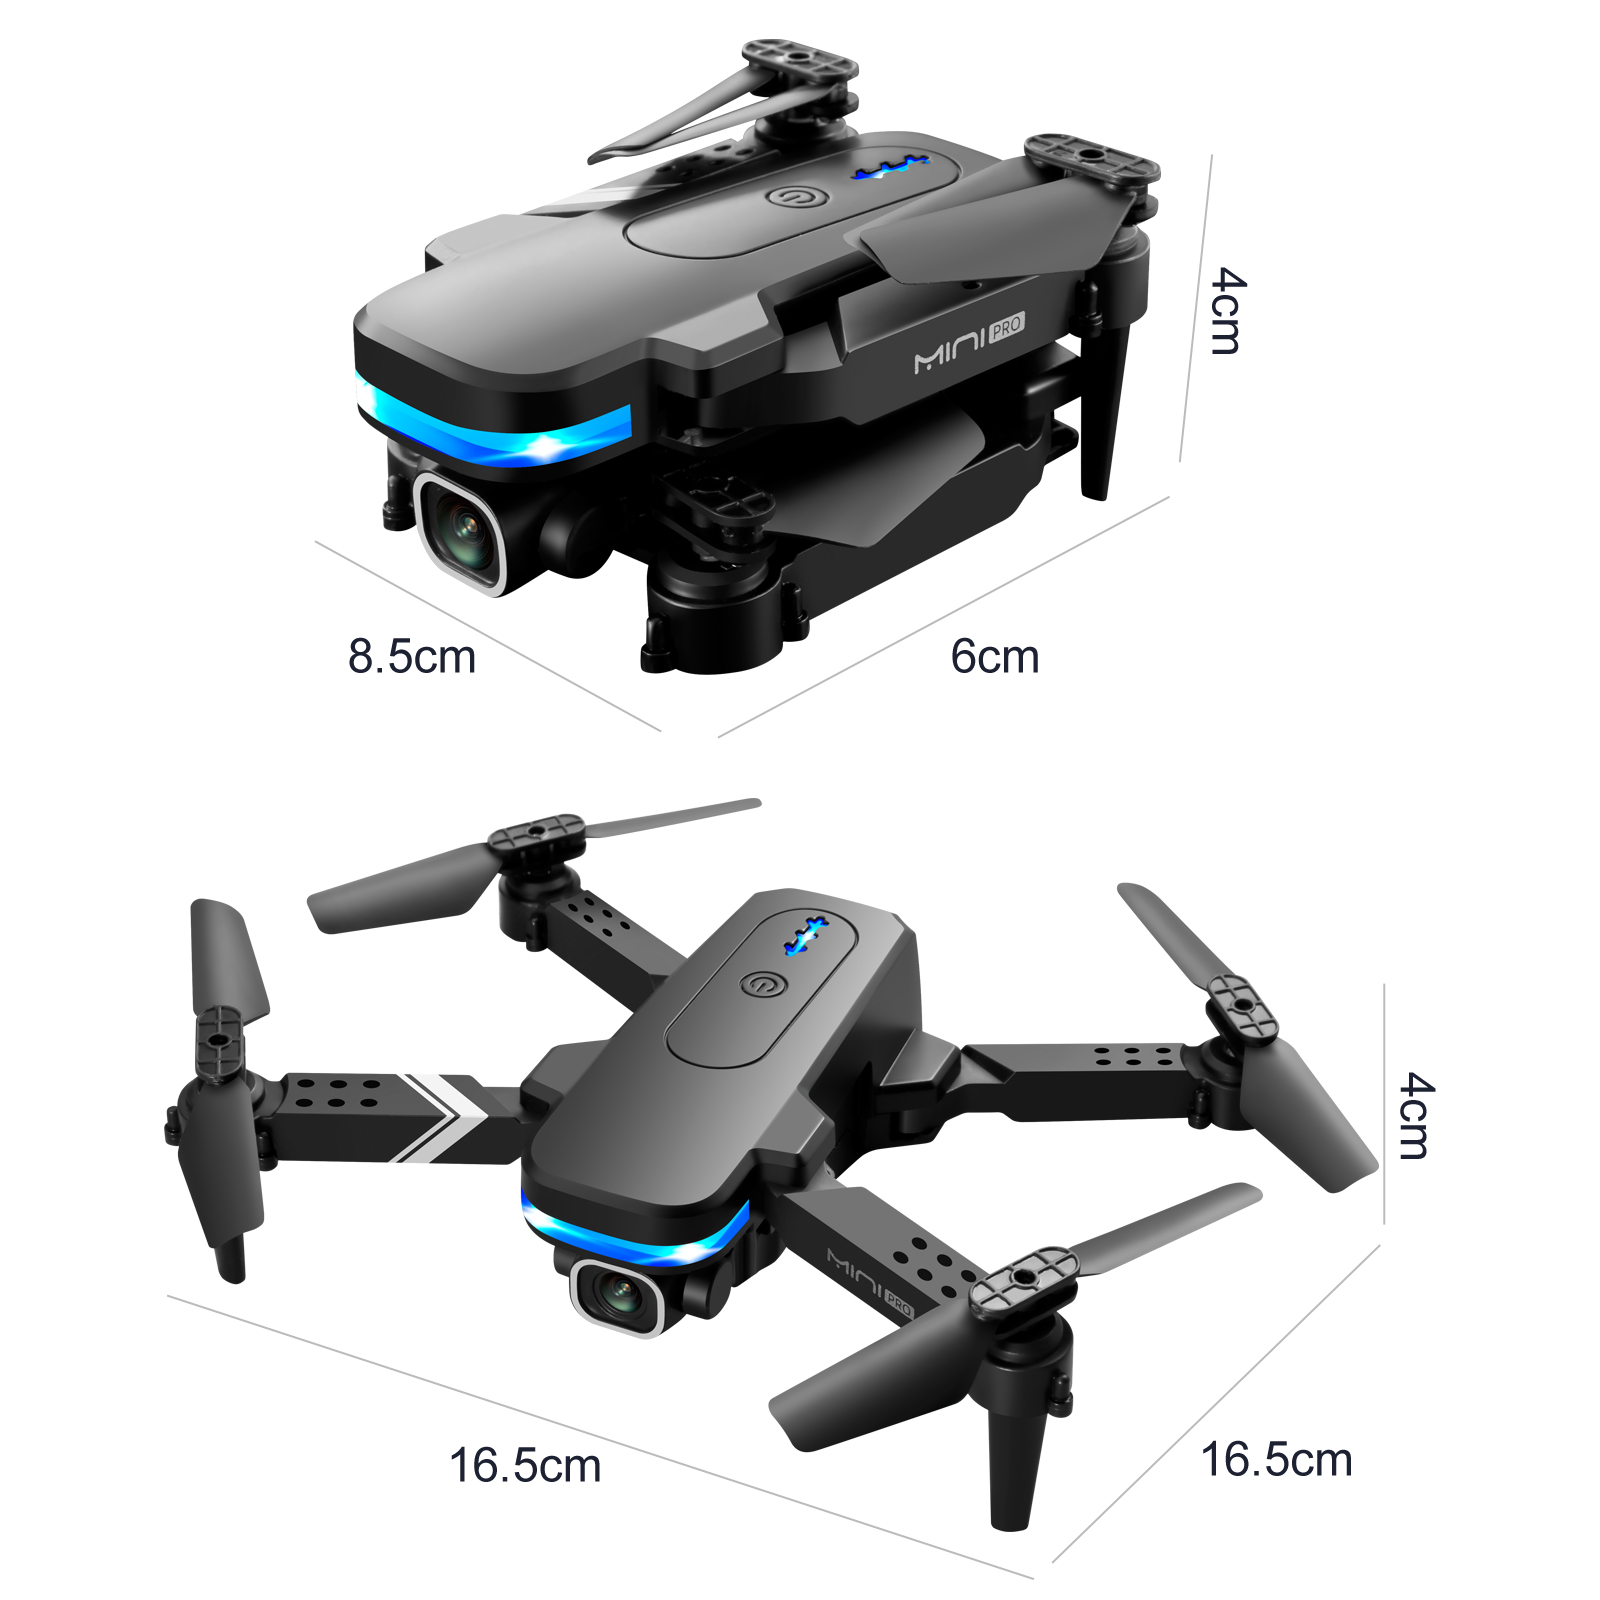 KY910-Mini-WiFi-FPV-with-4K-HD-Dual-50x-ZOOM-Camera-Altitude-Hold-Mode-Gravity-Control-Foldable-RC-D-1902386-23